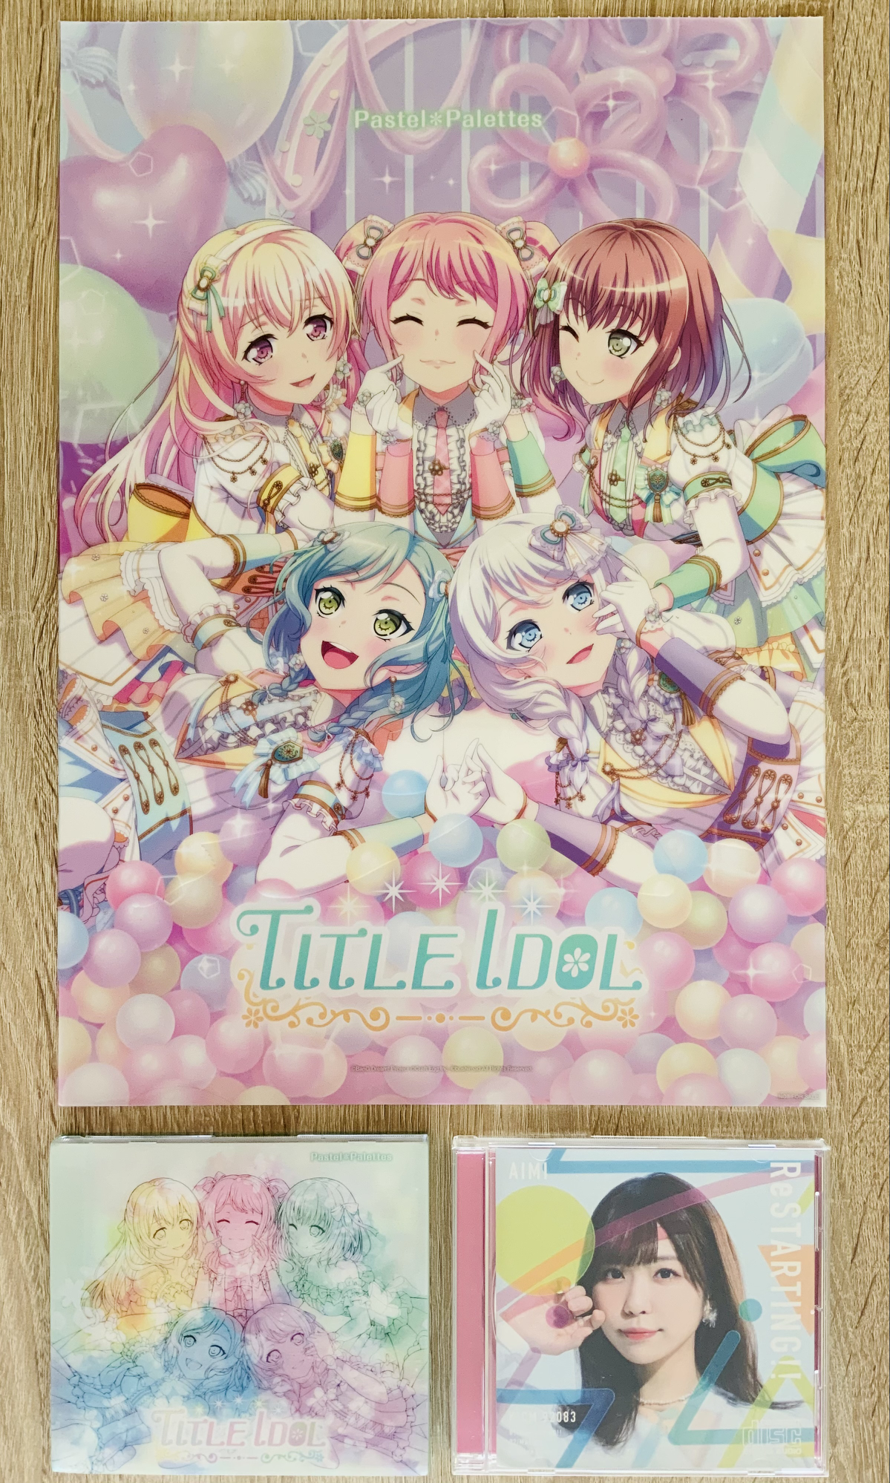 A parcel just came in!! AAAAAAAHH I’m soso happy I got my hand on the limited edition of Title Idol,...